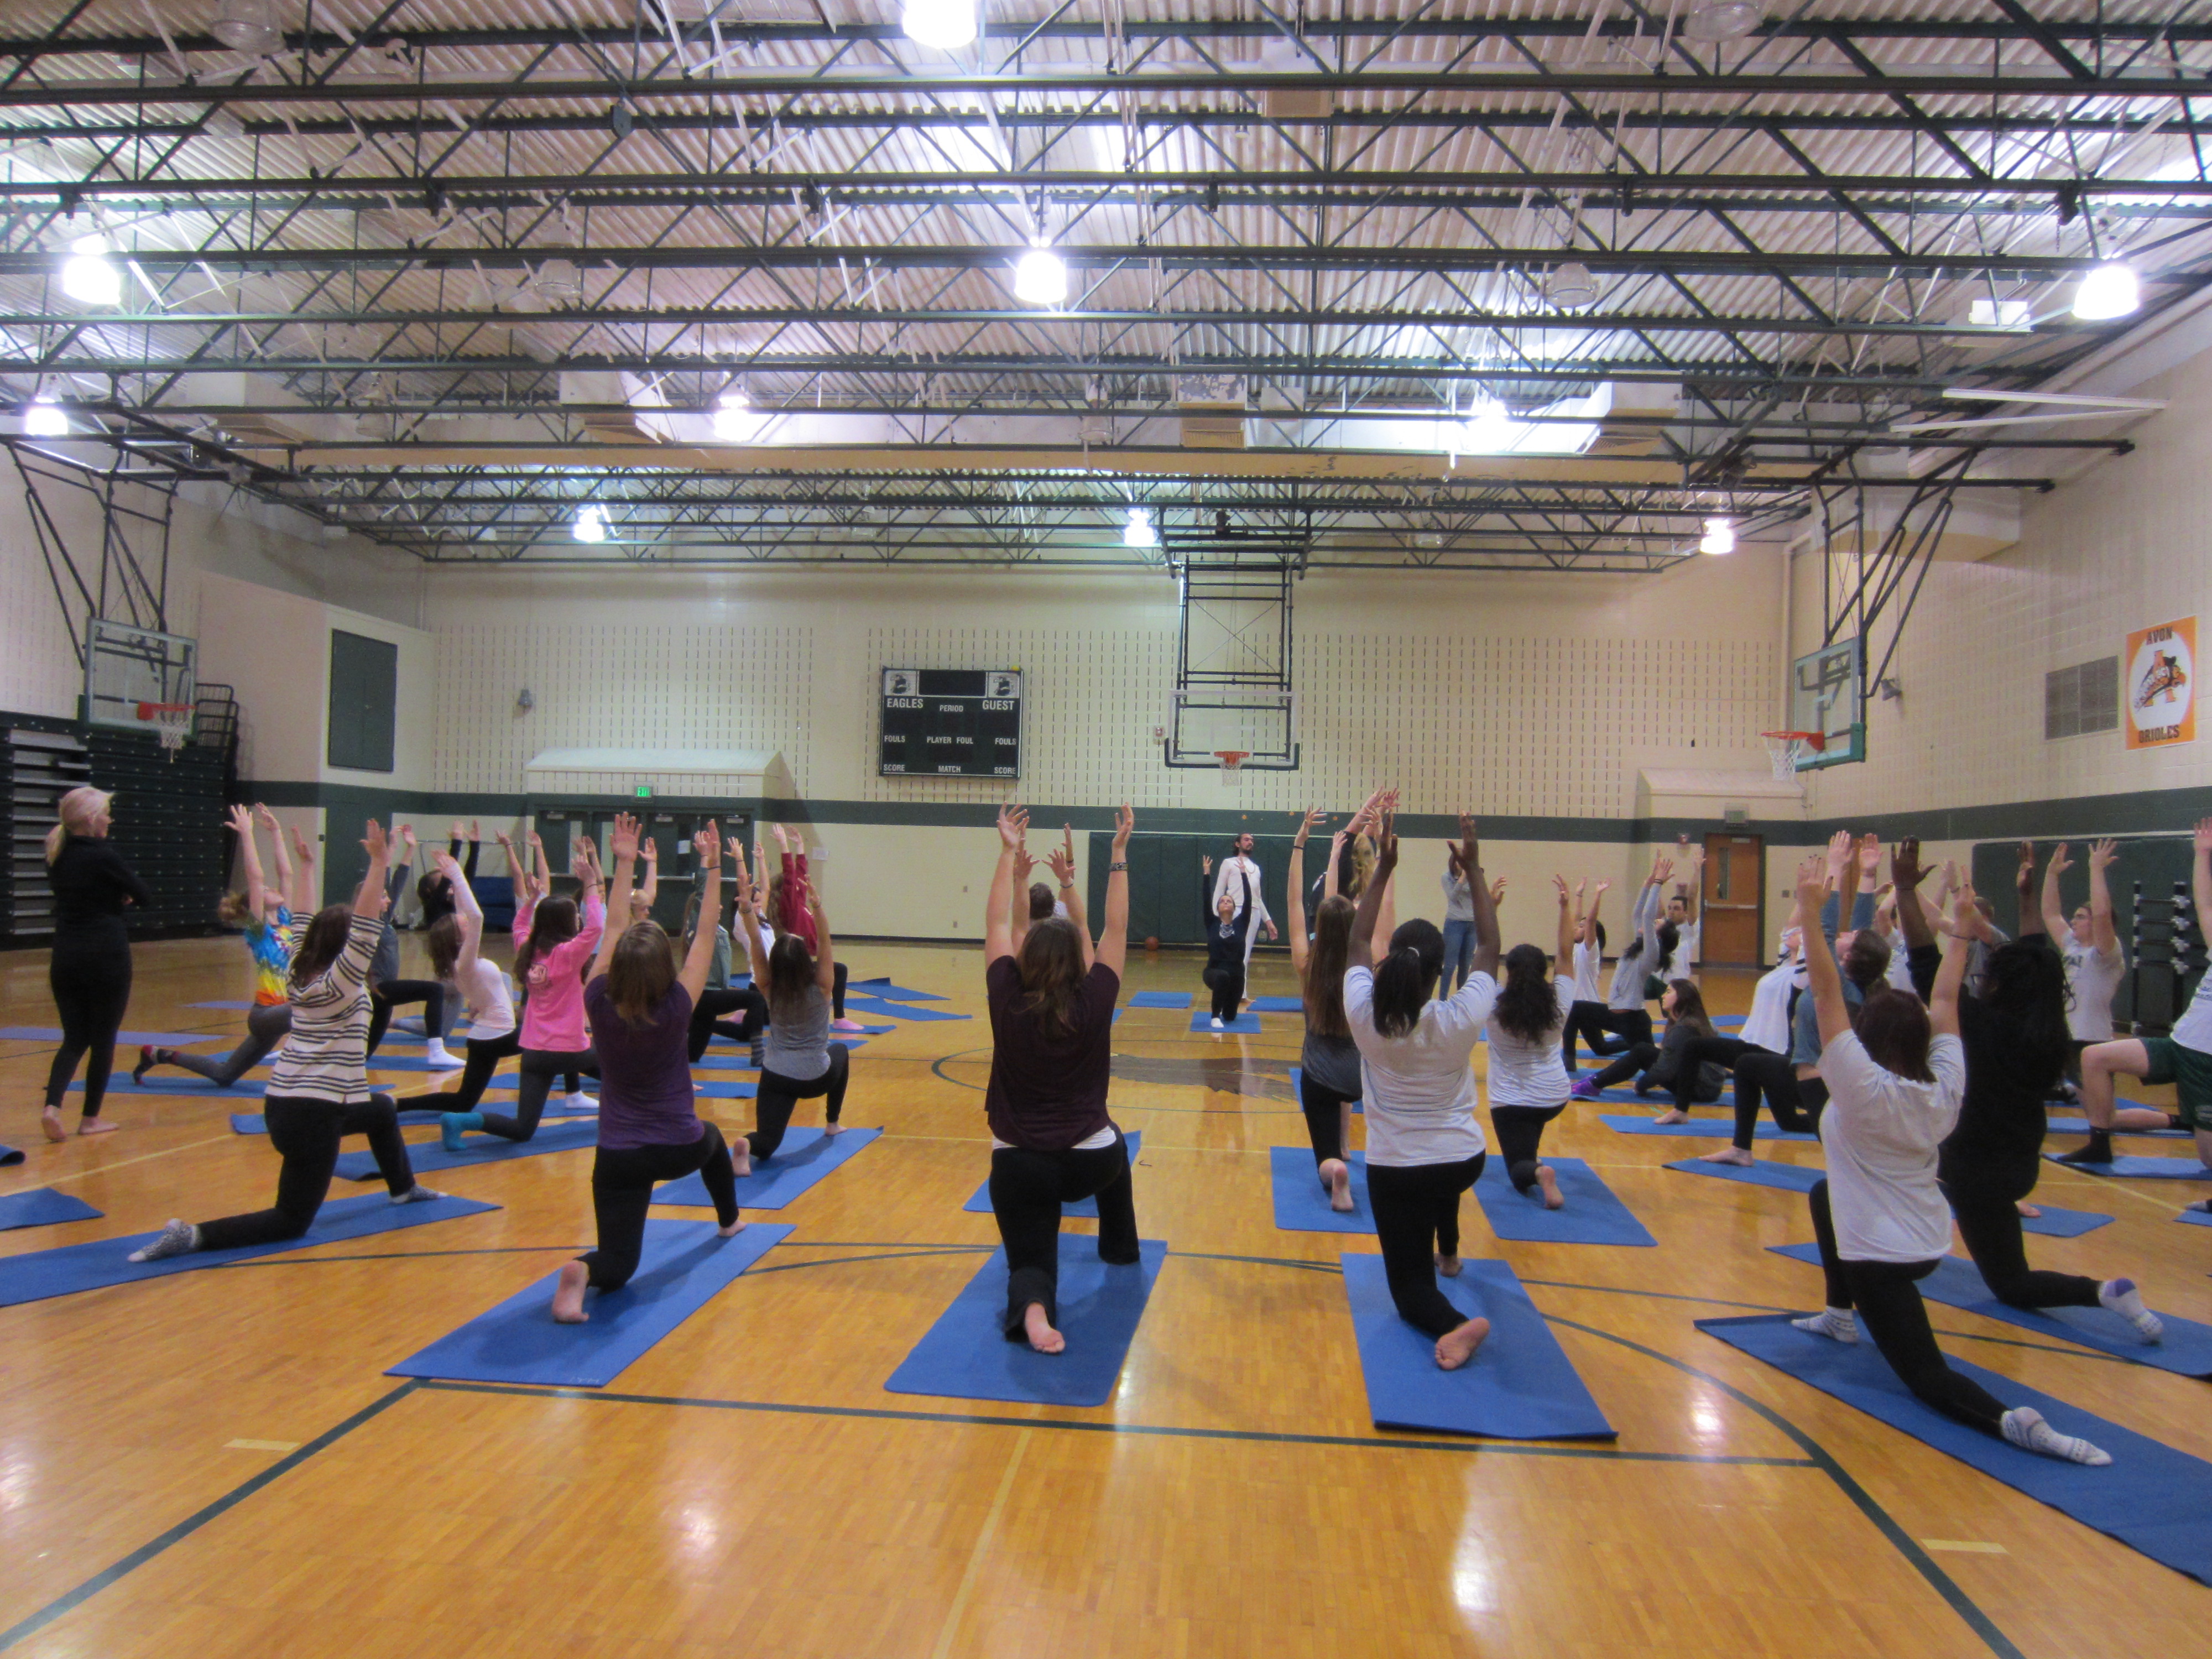 Zionsville Community High School students filmed for Indy Yoga Movement